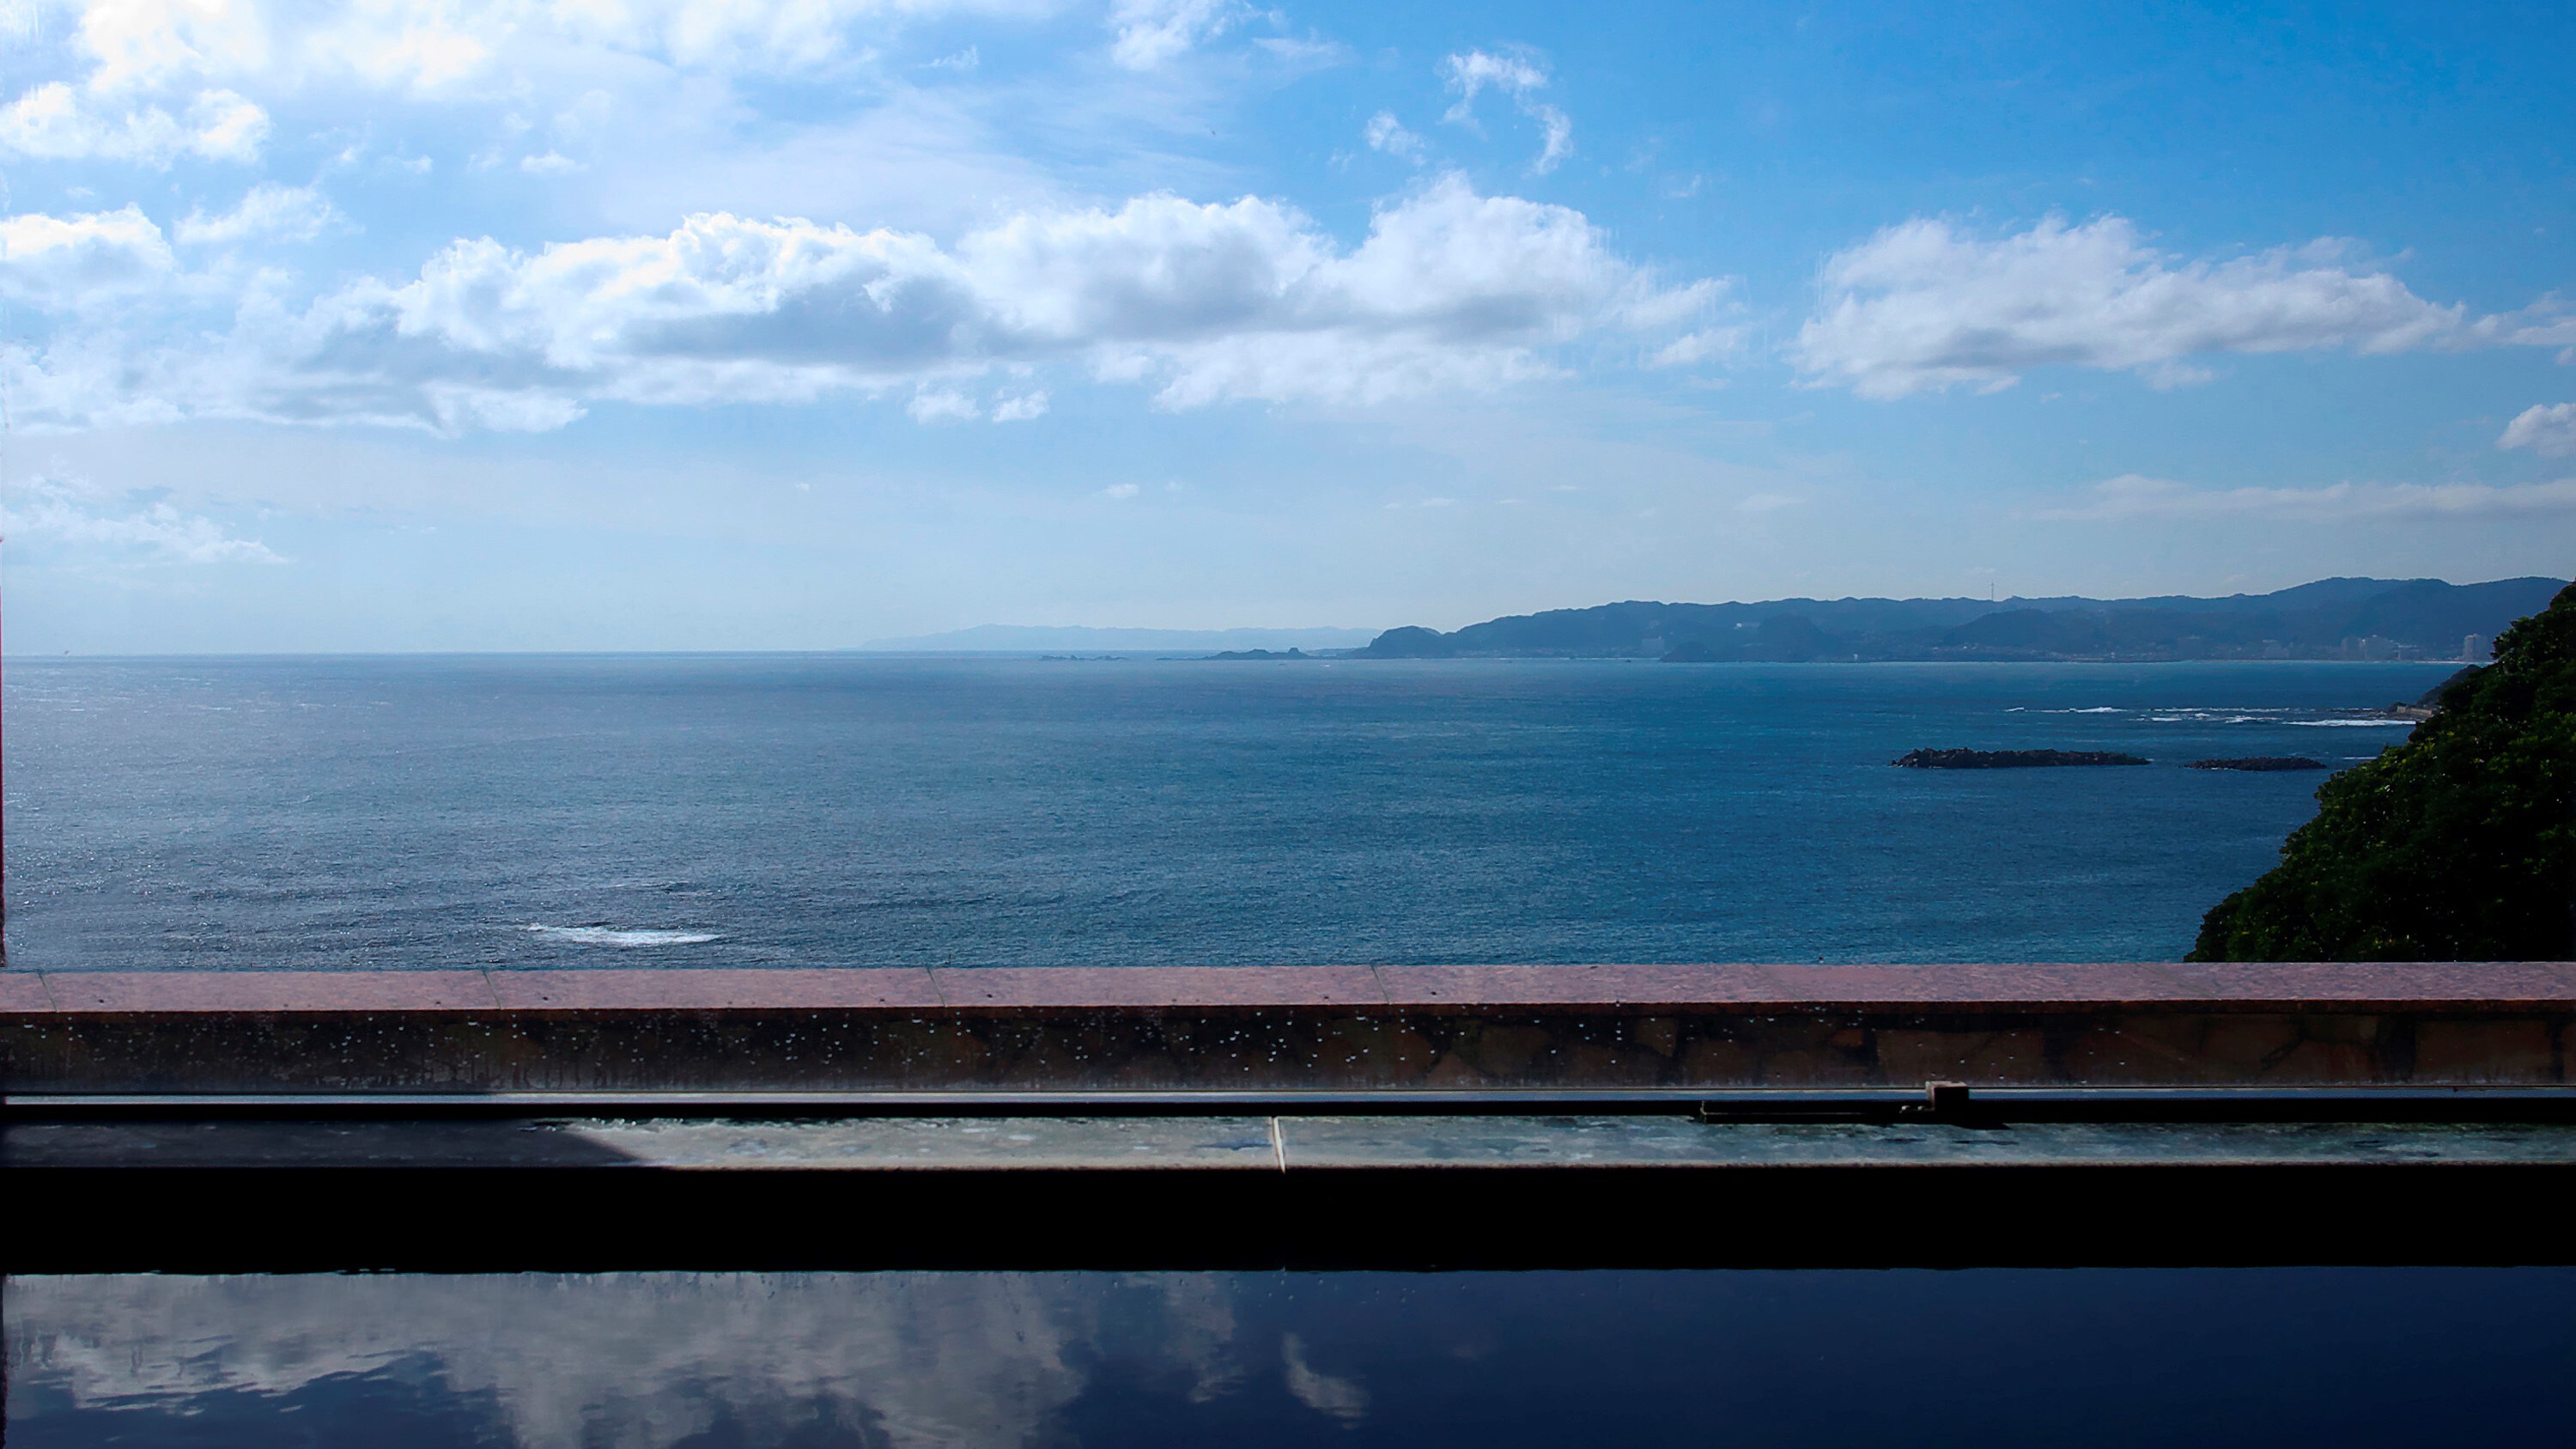 You can overlook the Pacific Ocean from the observation bath on the 6th floor of the tower building.